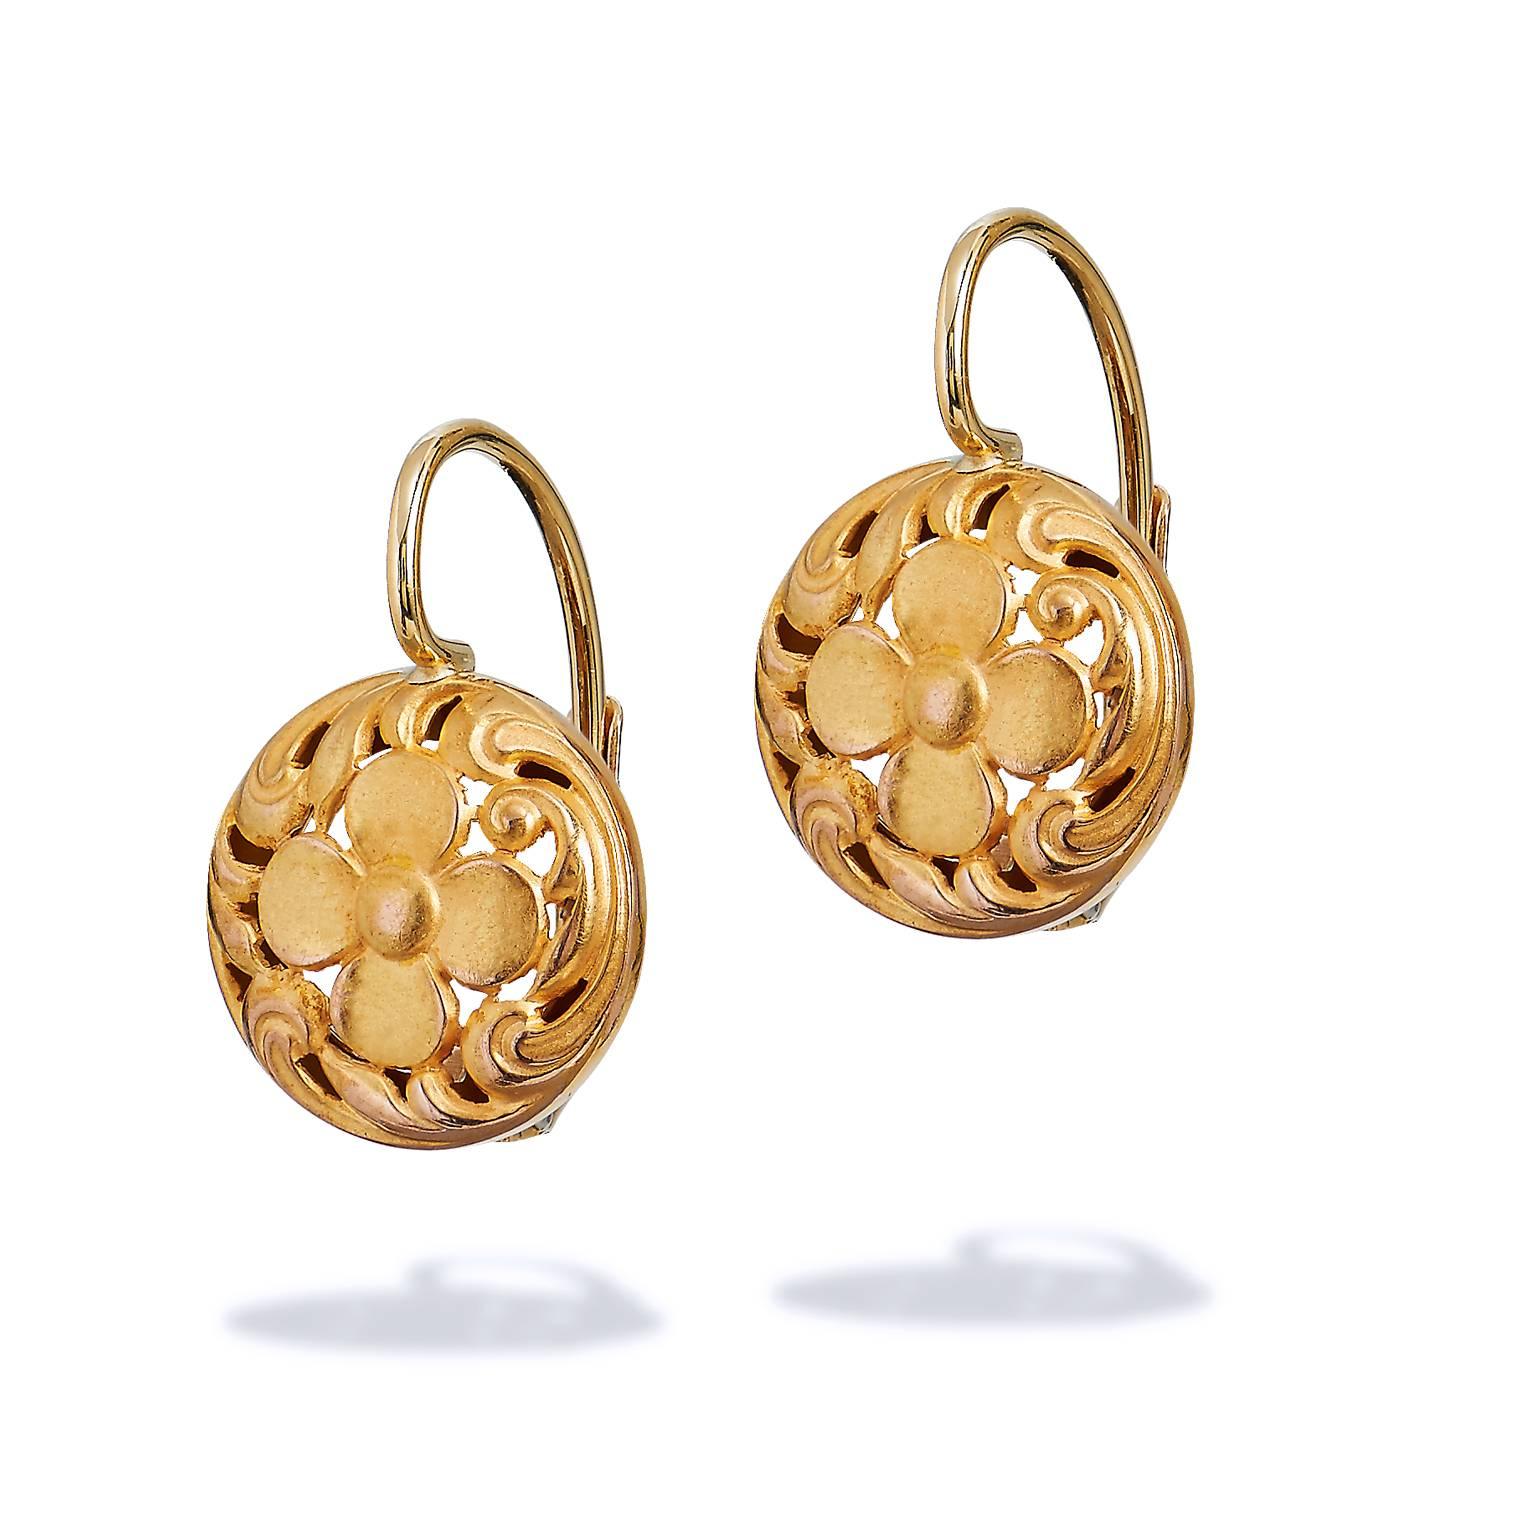 Saunter back to the days of yesteryear with these Art Noveau French Hallmark 18 karat yellow gold lever-back earrings. Enjoy the purity and natural form of these previously loved lever-back earrings.
